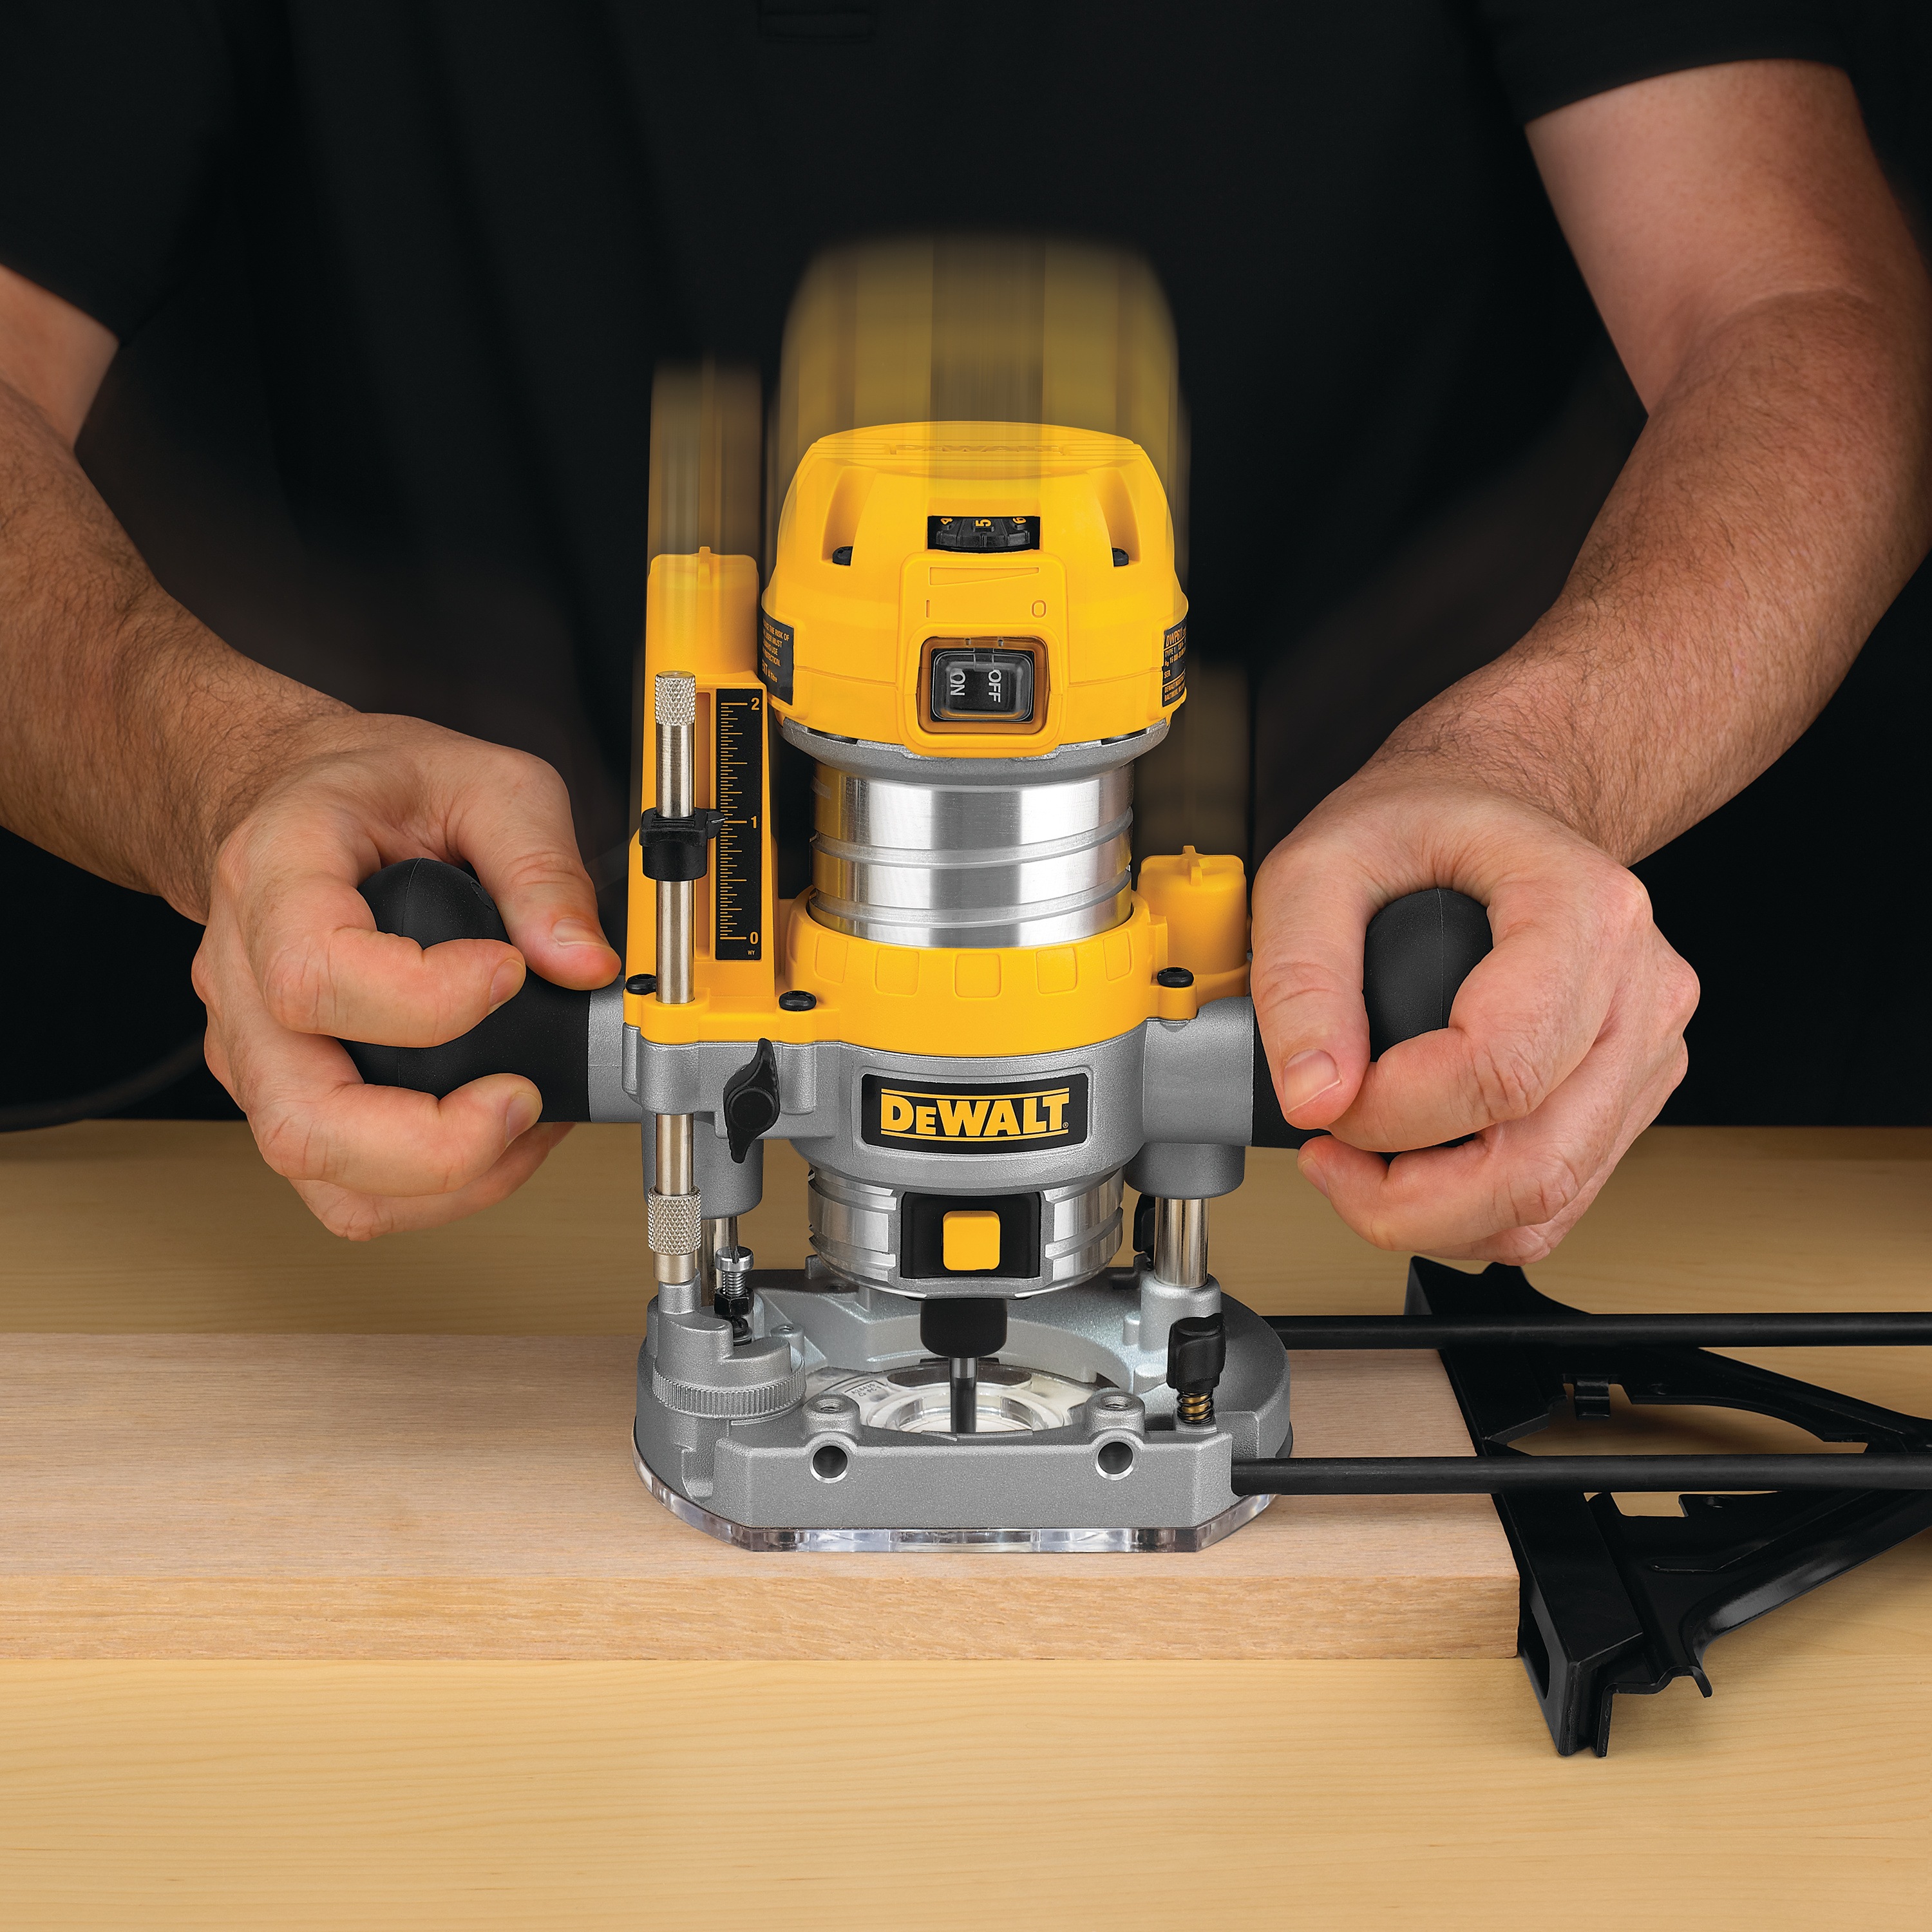 DEWALT - 114 HP Max Torque Variable Speed Compact Router Combo Kit with LEDs - DWP611PK